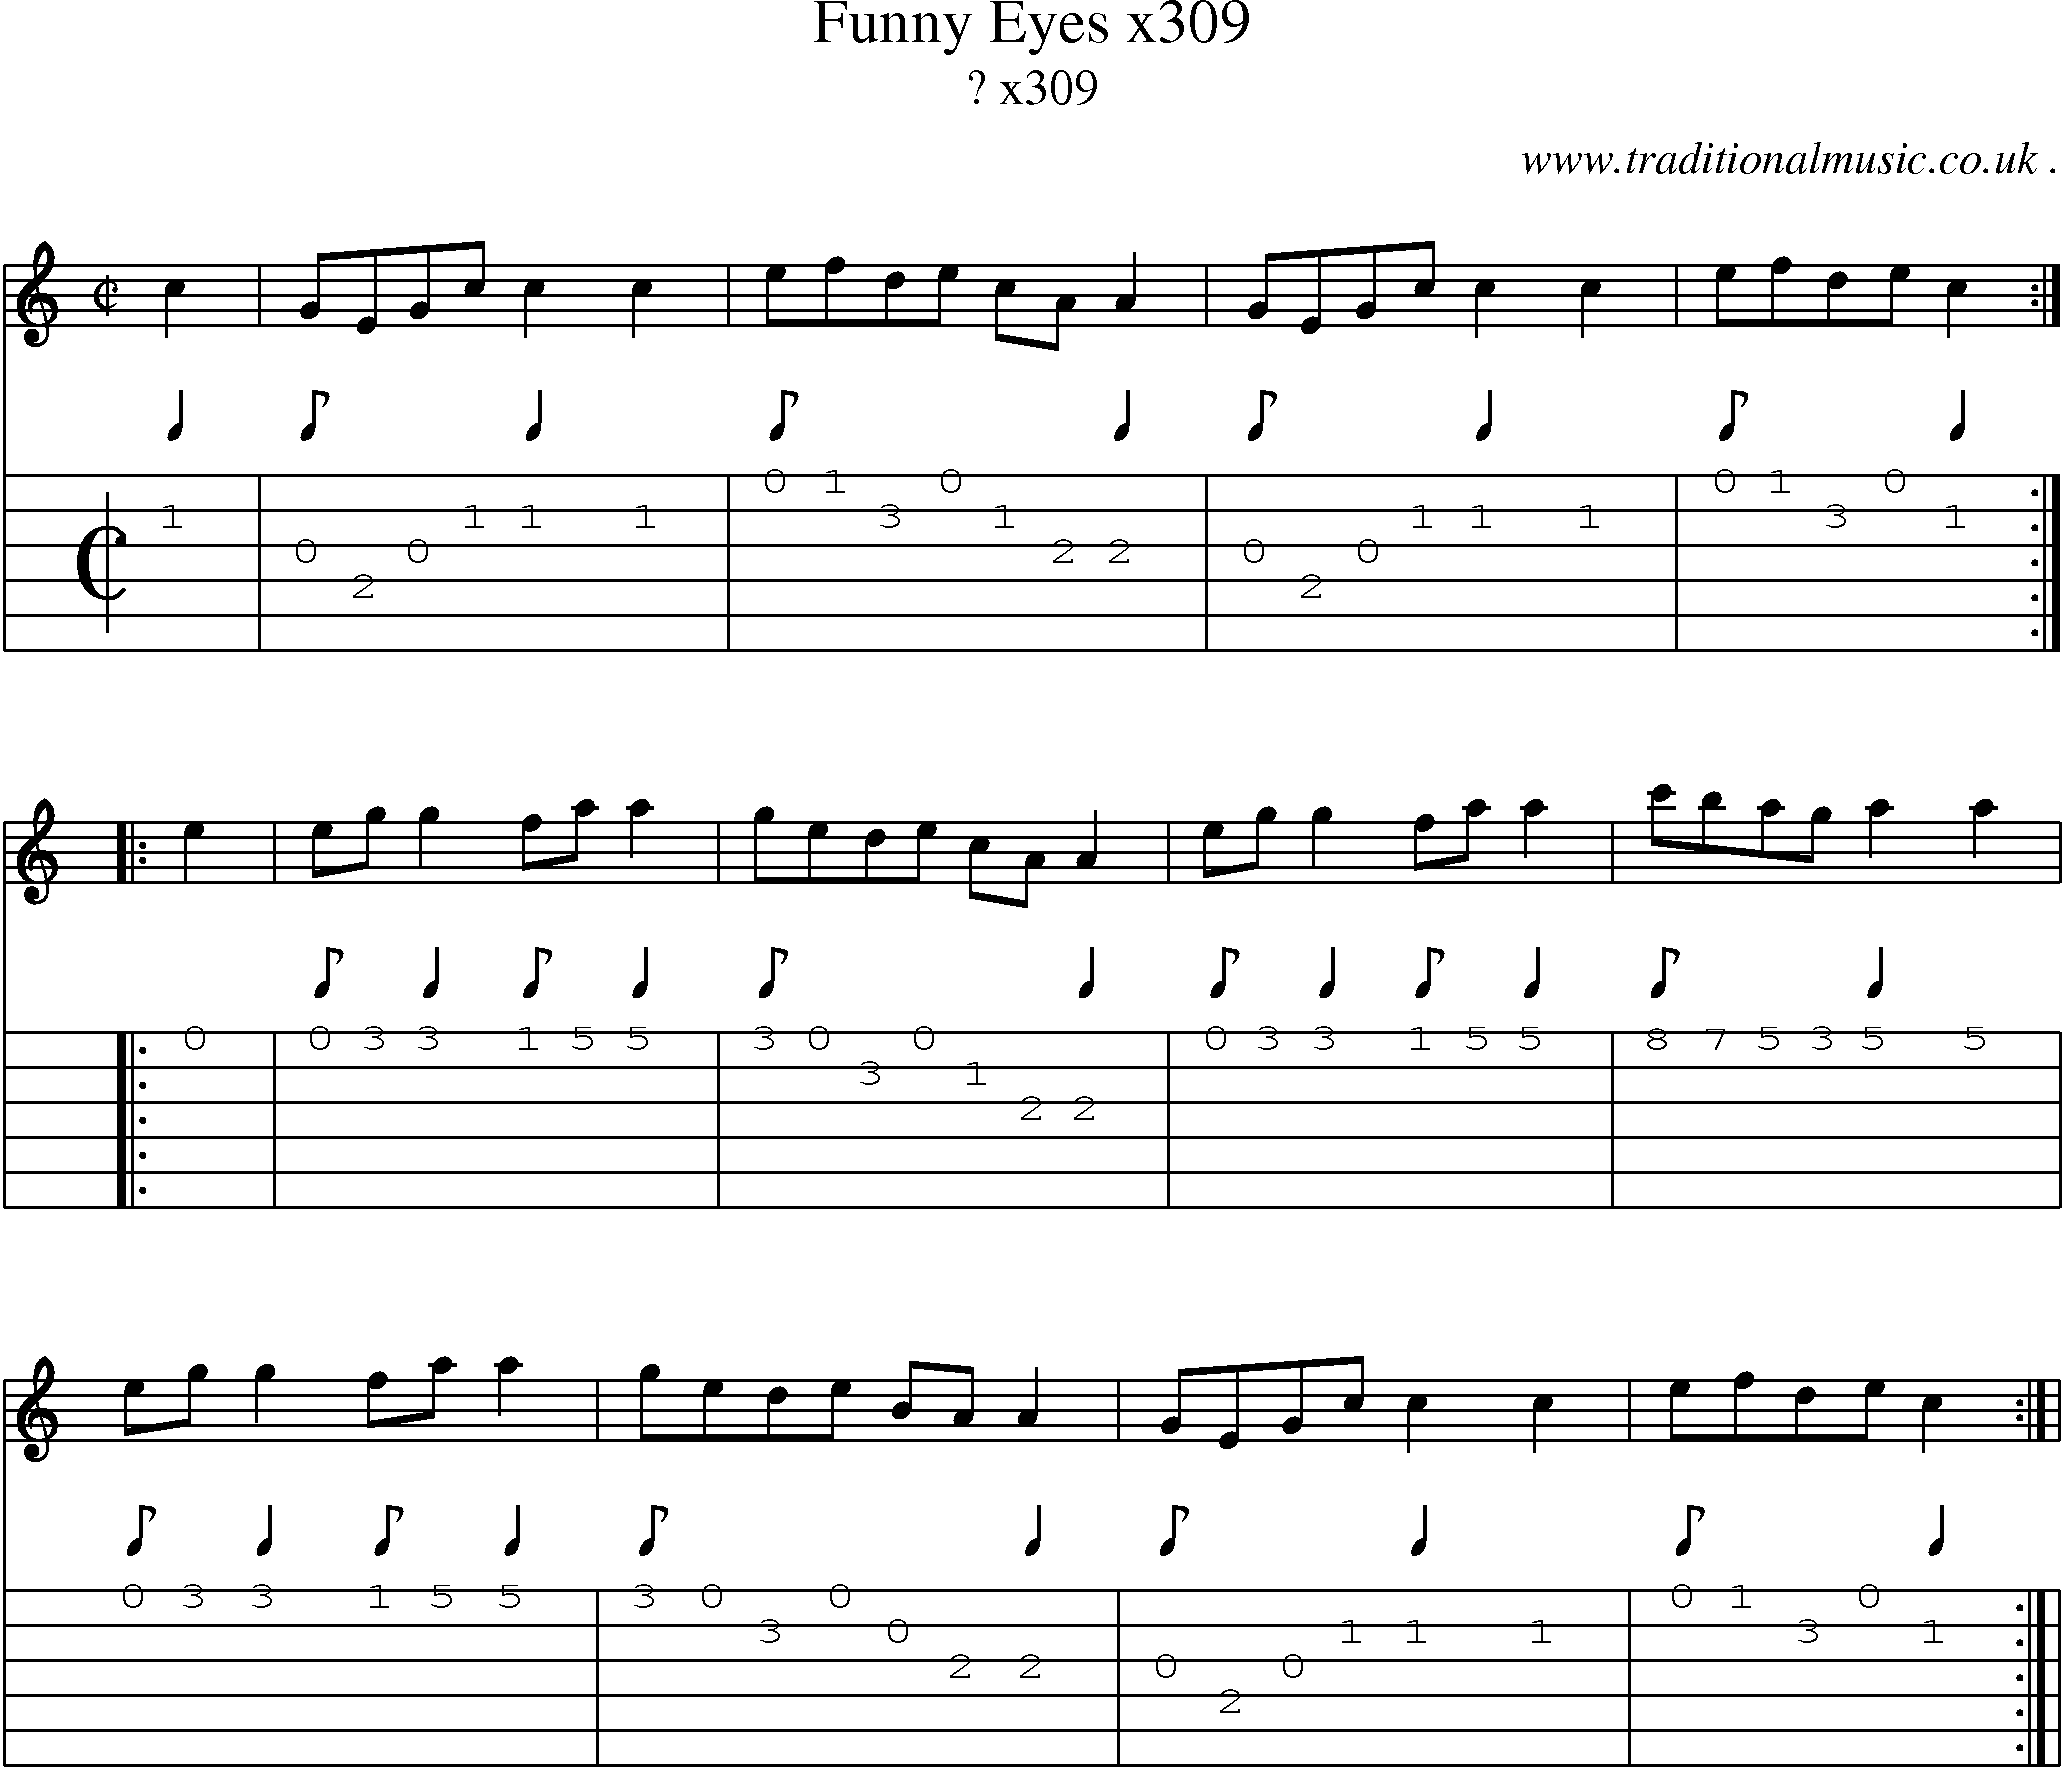 Sheet-Music and Guitar Tabs for Funny Eyes X309